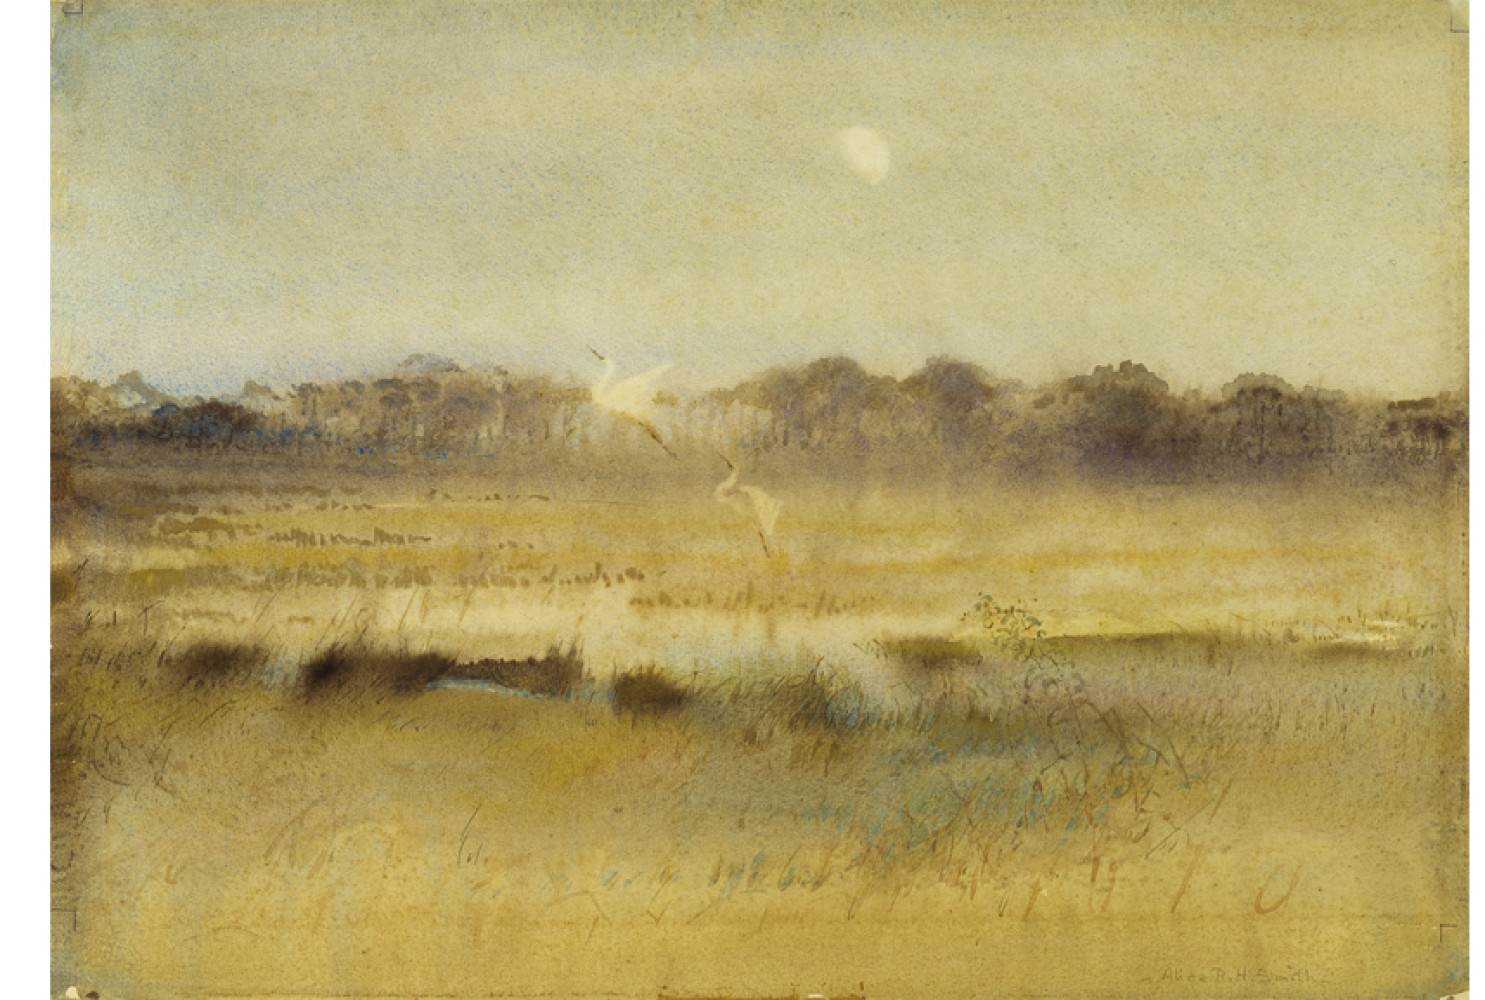 A Salt Creek from the series A Carolina Rice Plantation of the Fifties, ca. 1935, By Alice Ravenel Huger Smith (American, 1876—1958); Watercolor on paper; Gift of the artist; 1937.009.0029